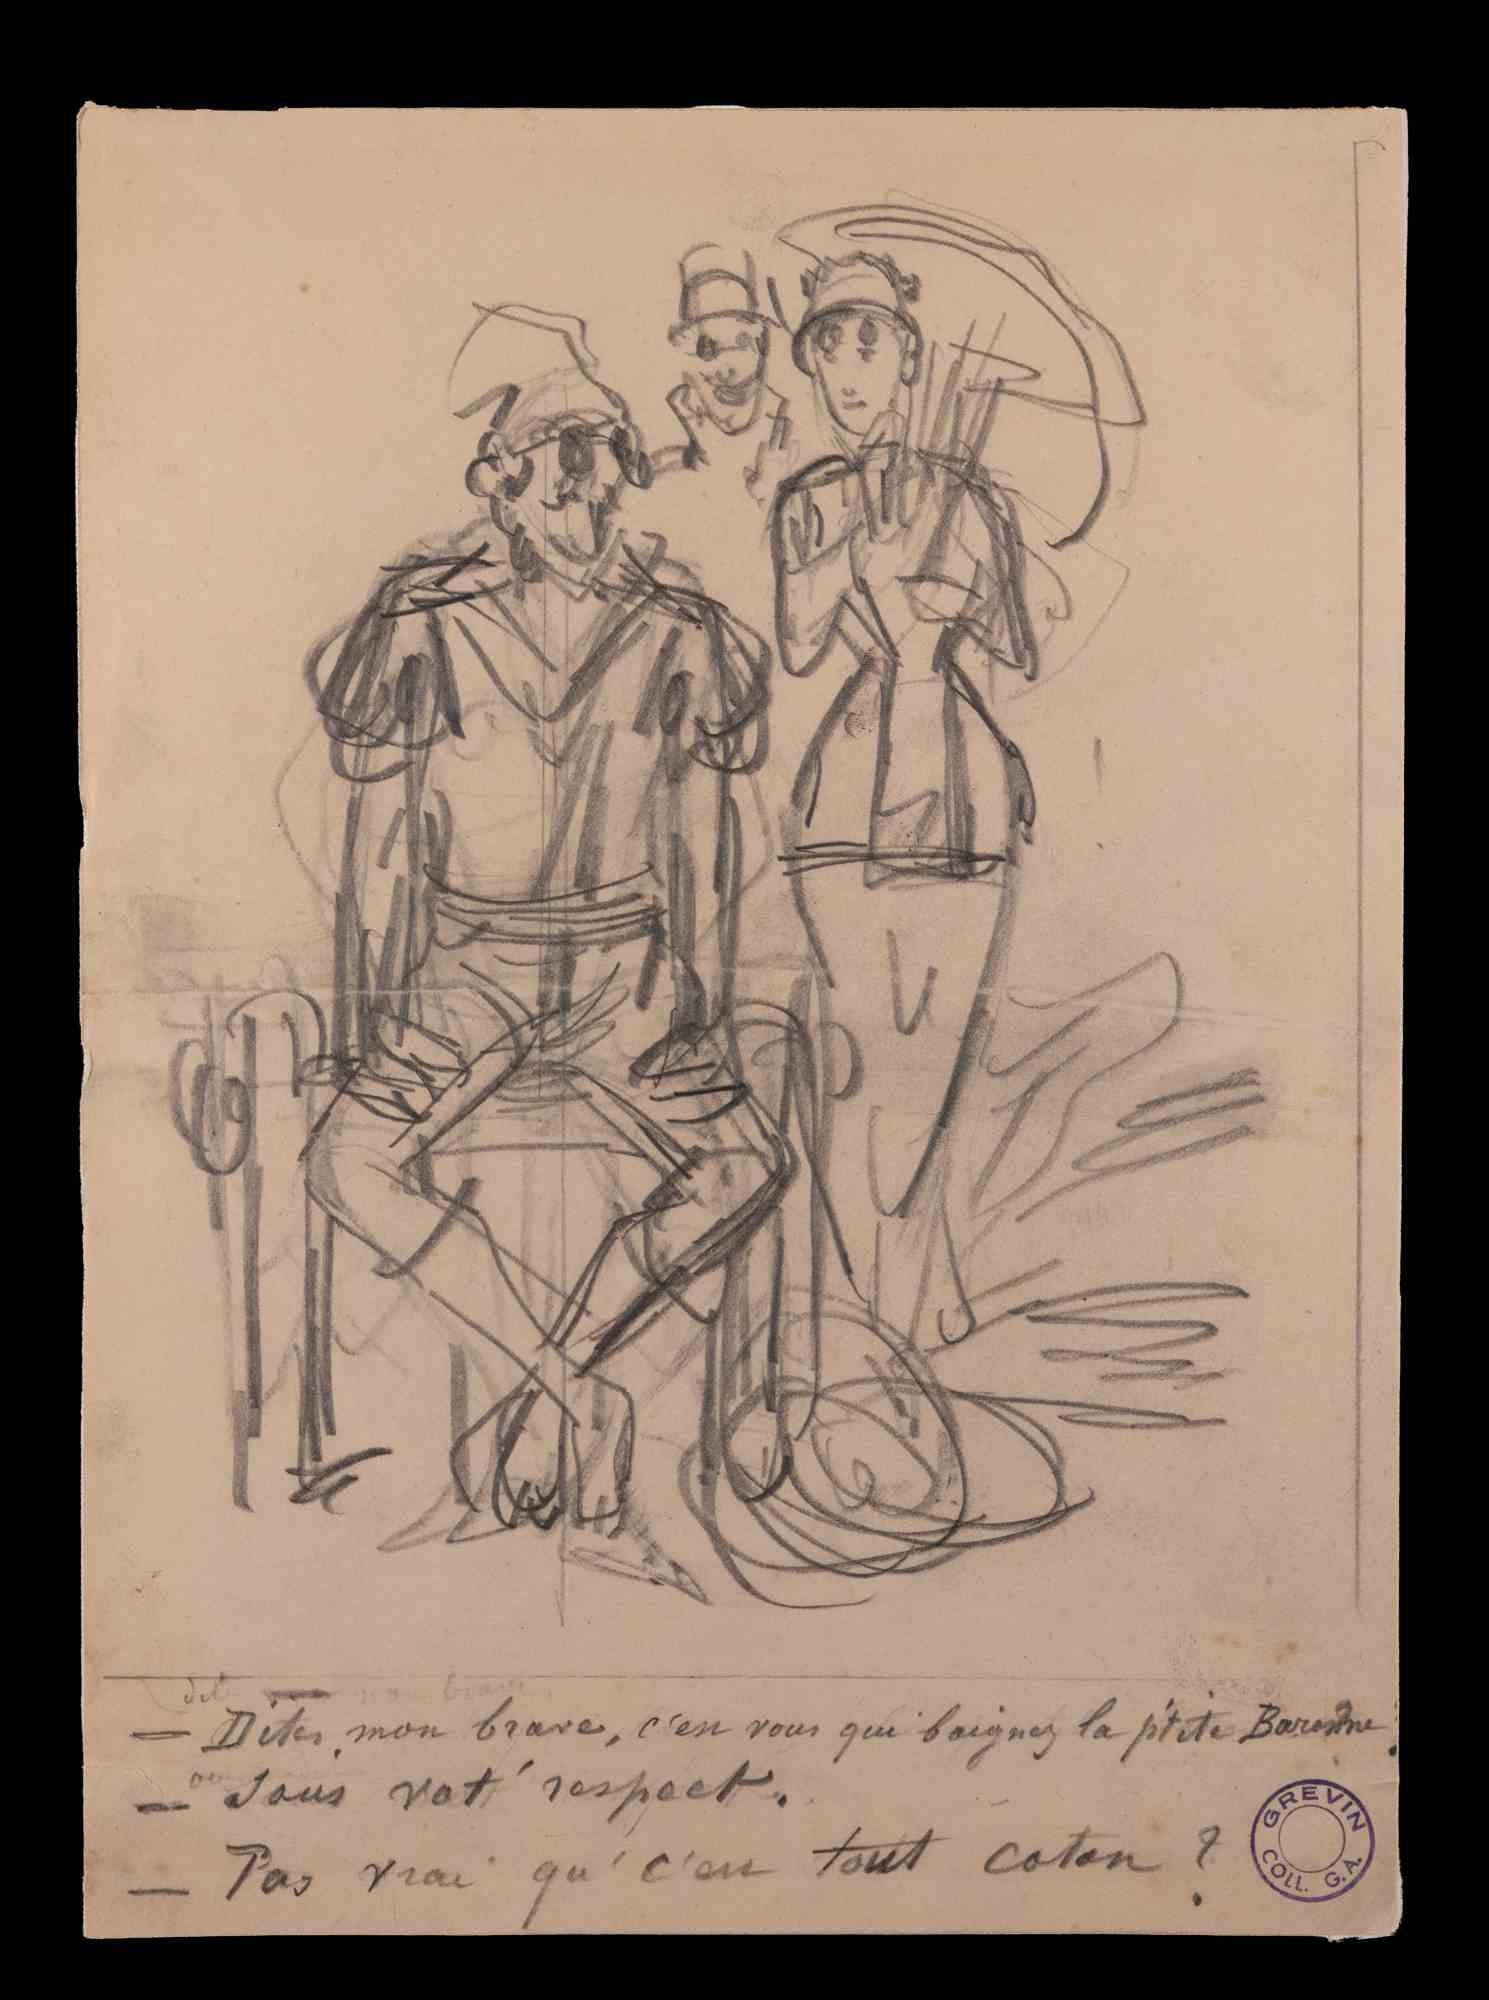 The Gentleman and the Woman with the Sunshade - by Alfred Grévin-Late 19 Century